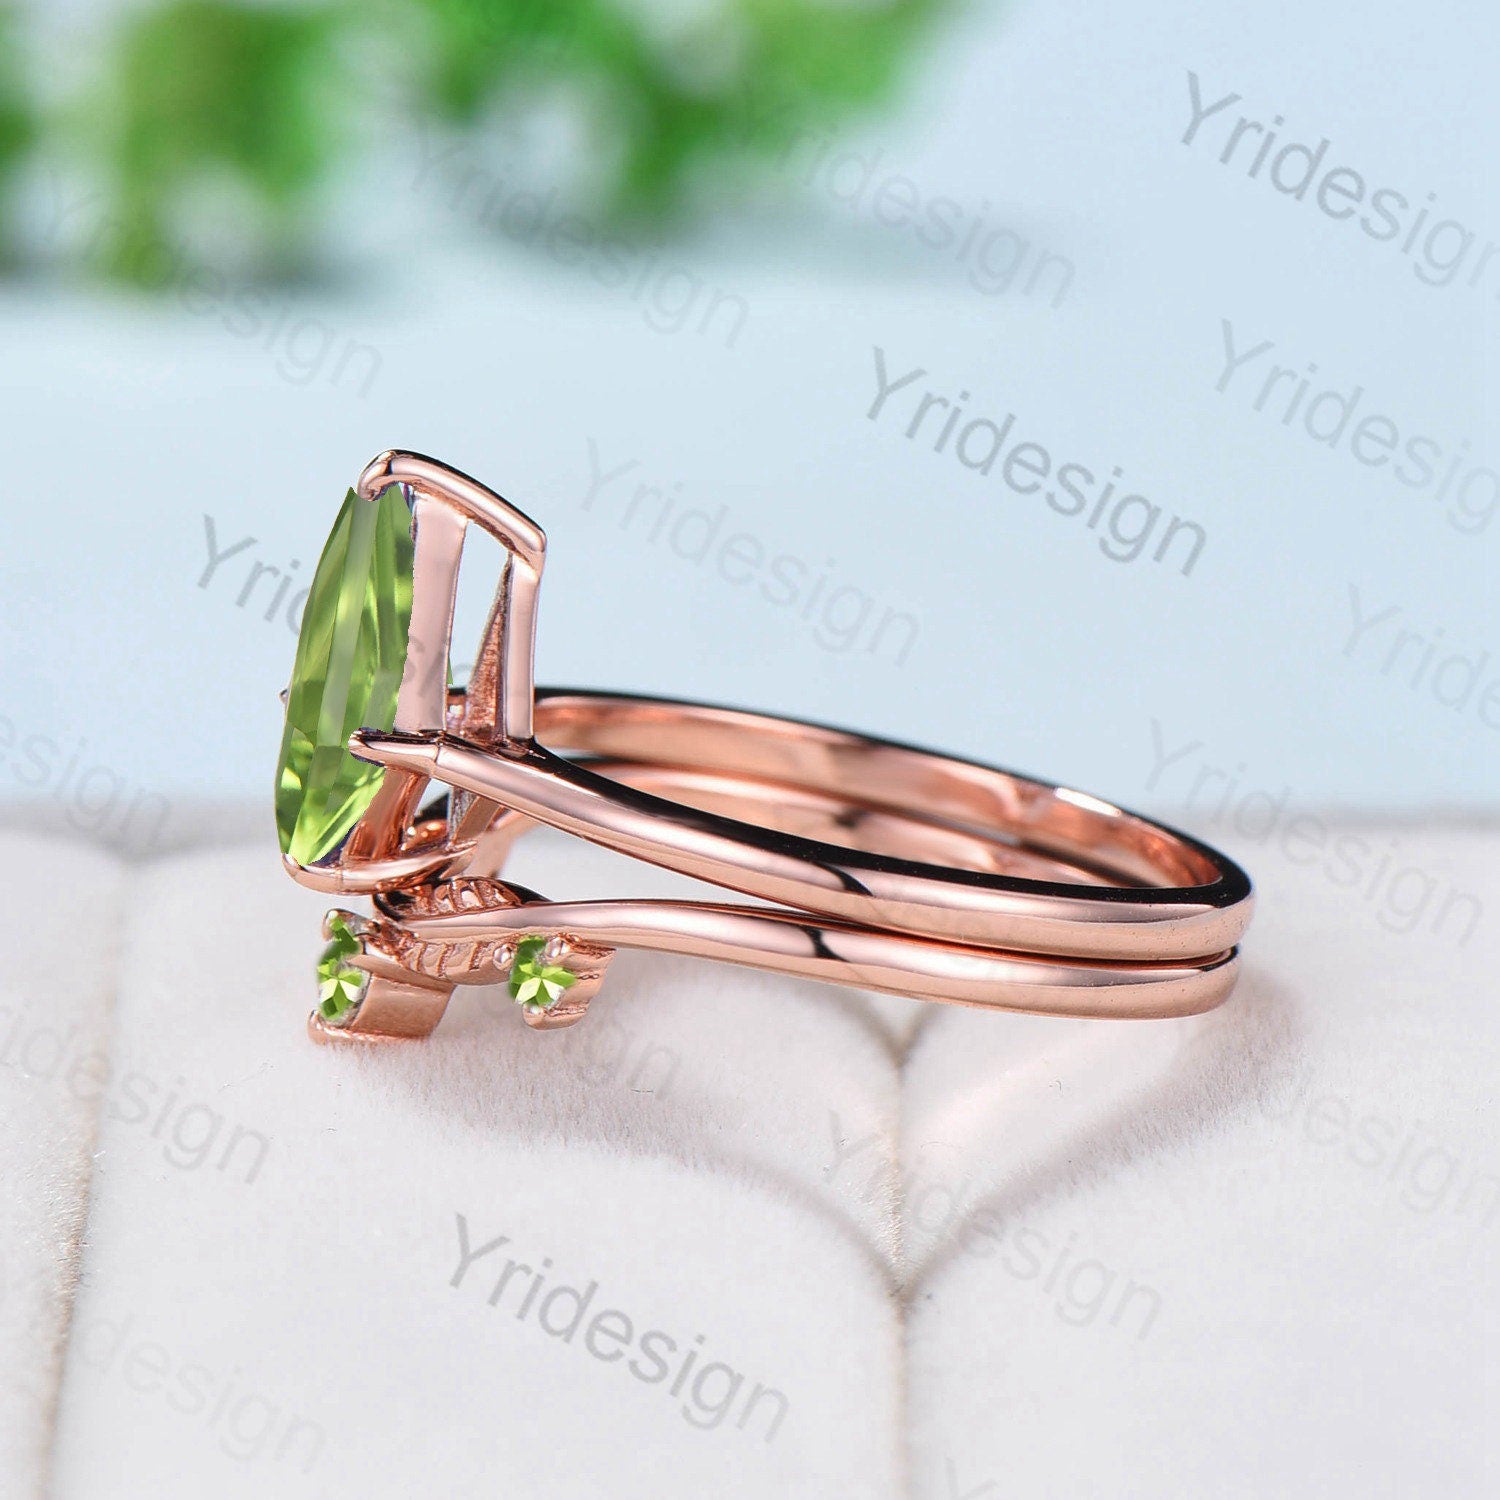 Minimalist Peridot Ring kite shaped Dainty engagement ring set rose gold Solitaire Bridal Set leaf stacking band vintage August birthstone - PENFINE